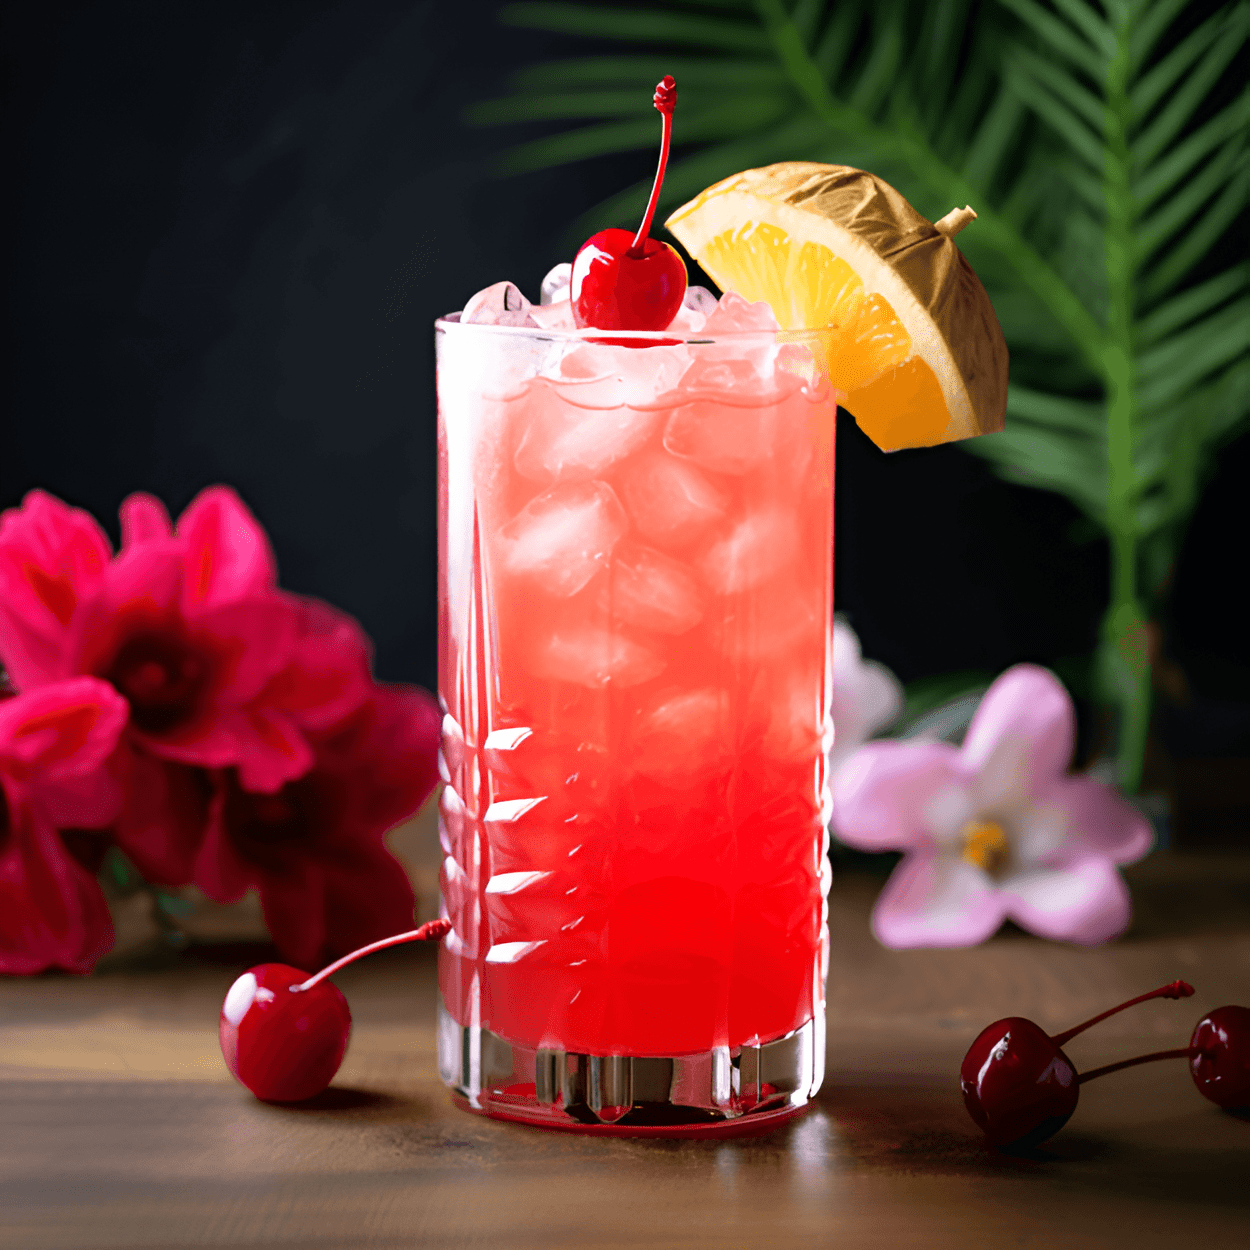 Relaxer Cocktail Recipe - The Relaxer cocktail is a sweet and creamy drink. It has a fruity taste, with a hint of coconut and pineapple. The vodka adds a slight kick, but it's not too strong.